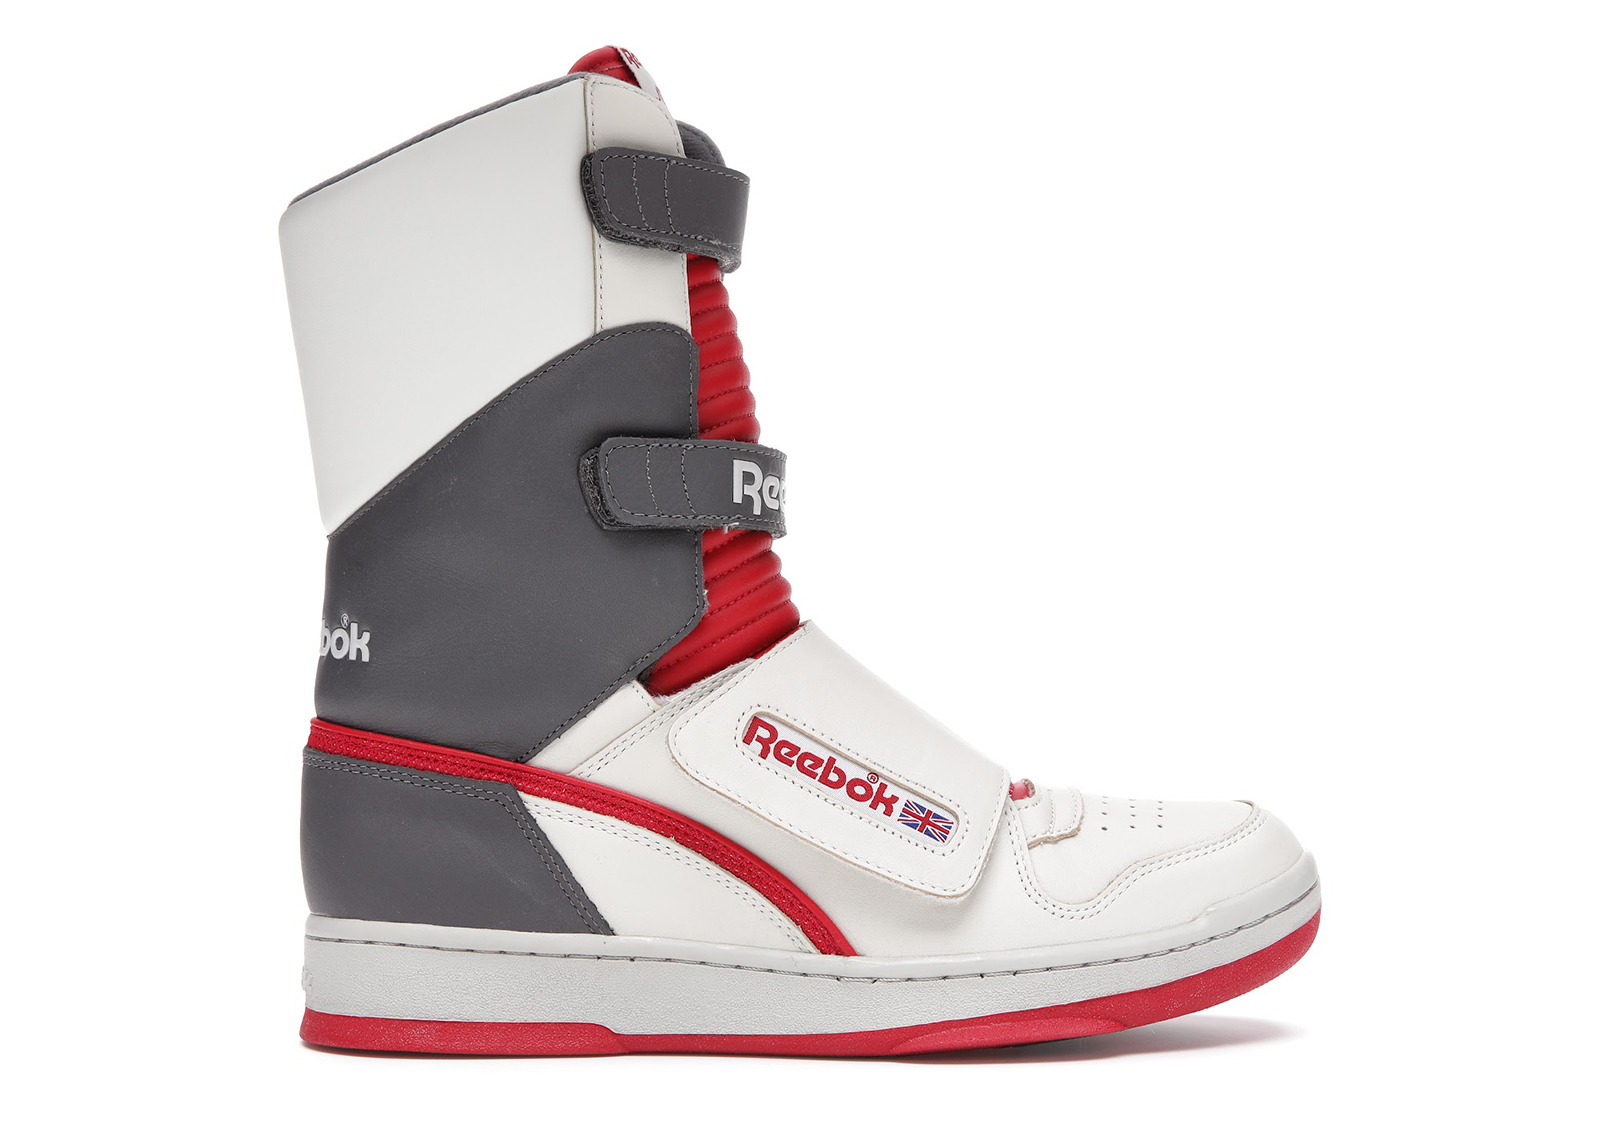 Reebok Alien Stomper Sneakers Available This Spring